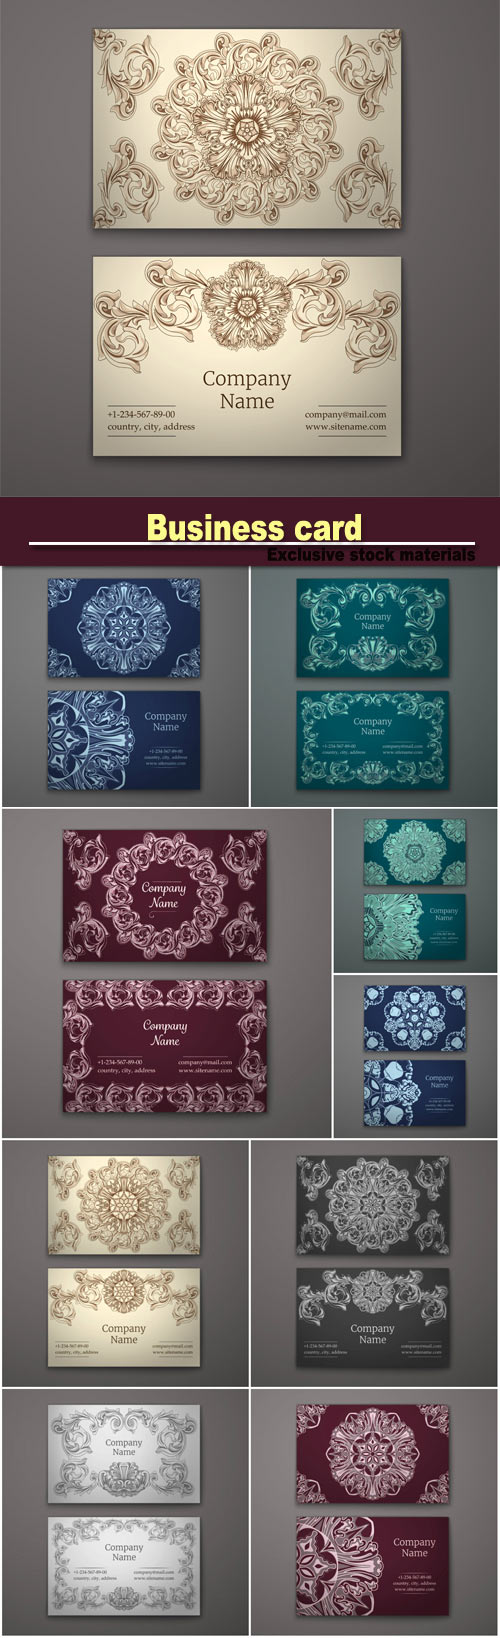 Business card in baroque style